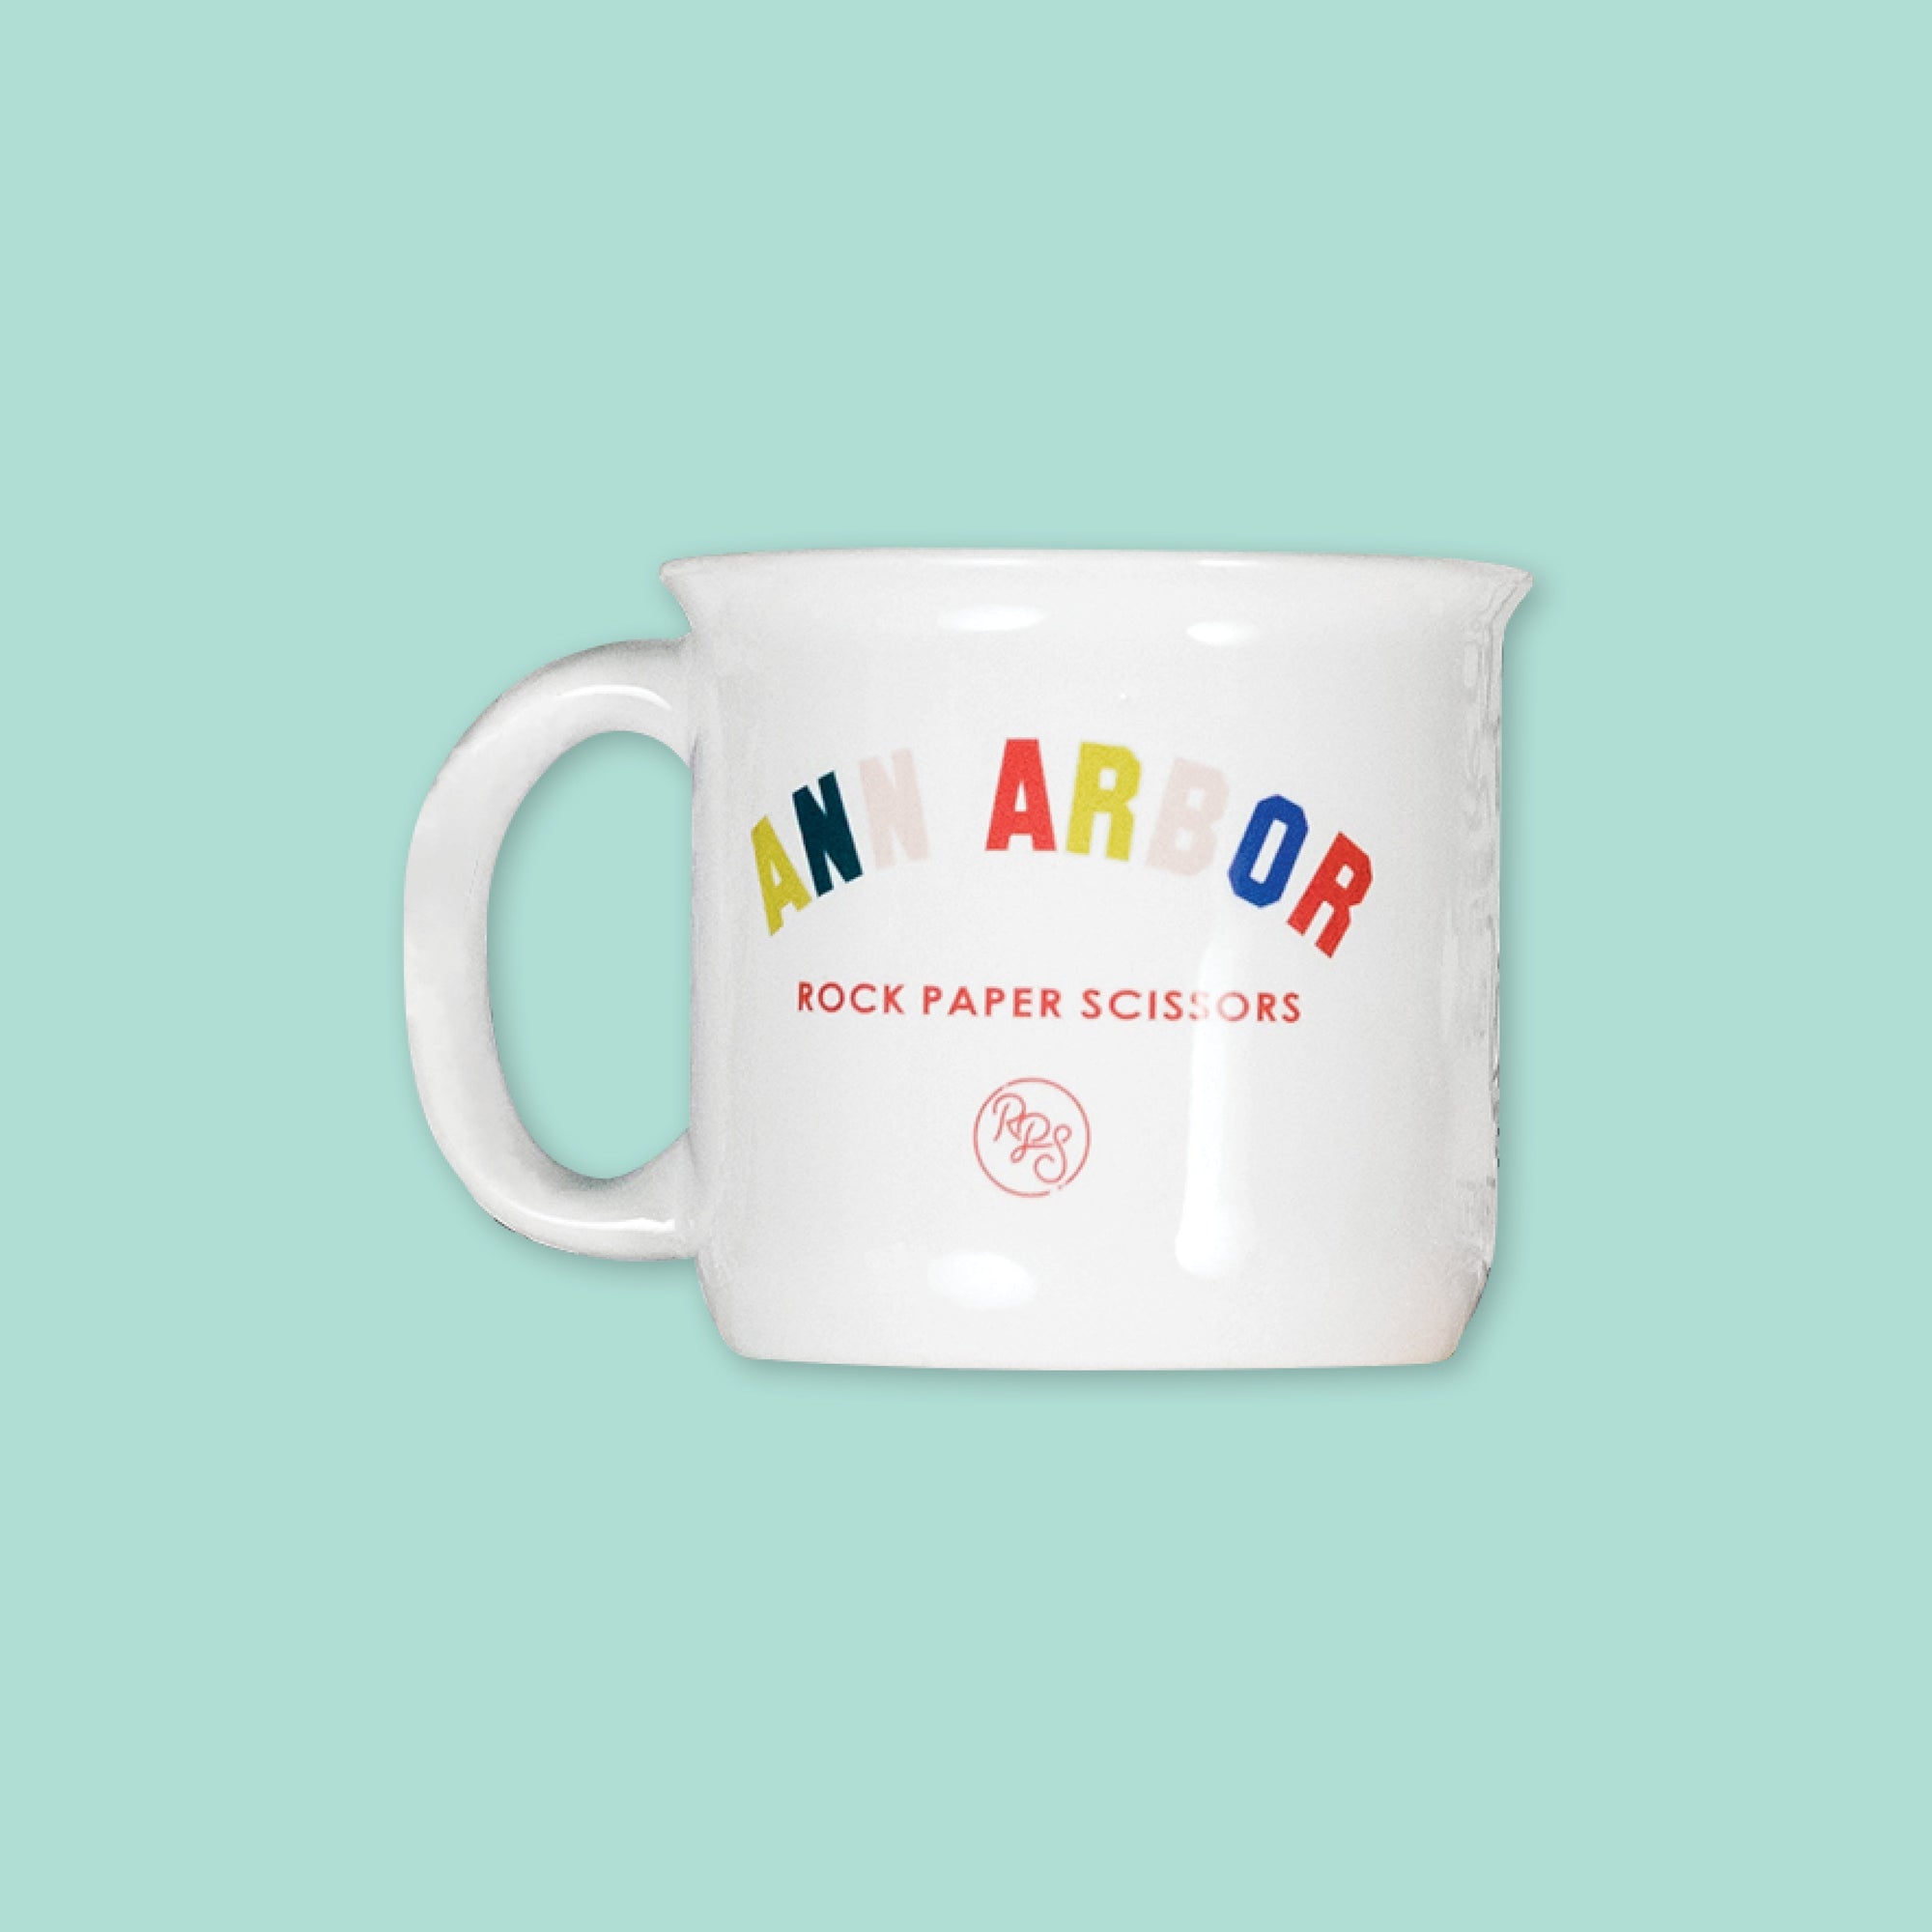 On a mint green background sits a mug. The white mug has a color collegiate font that says "ANN ARBOR" and under it says "ROCK PAPER SCISSORS" in a red, all caps block font. Under that is a circular, red "RPS" logo in handwritten script lettering.